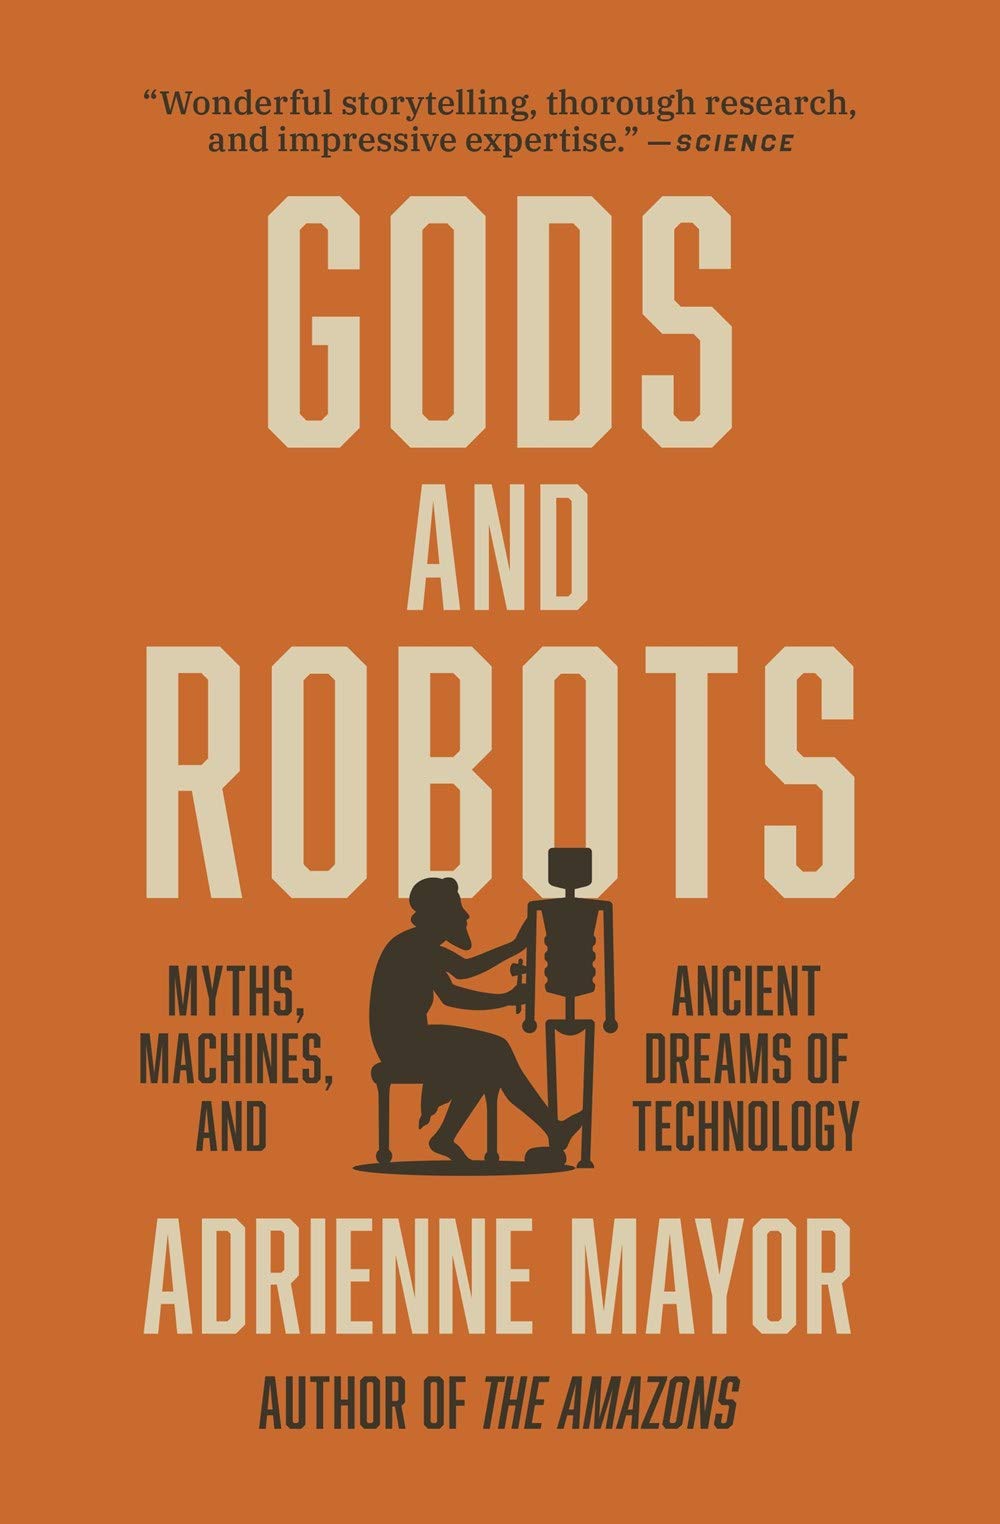 GODS AND ROBOTS. MYTHS, MACHINES, AND ANCIENT DREAMS OF TECHNOLOGY - Adrienne Mayor